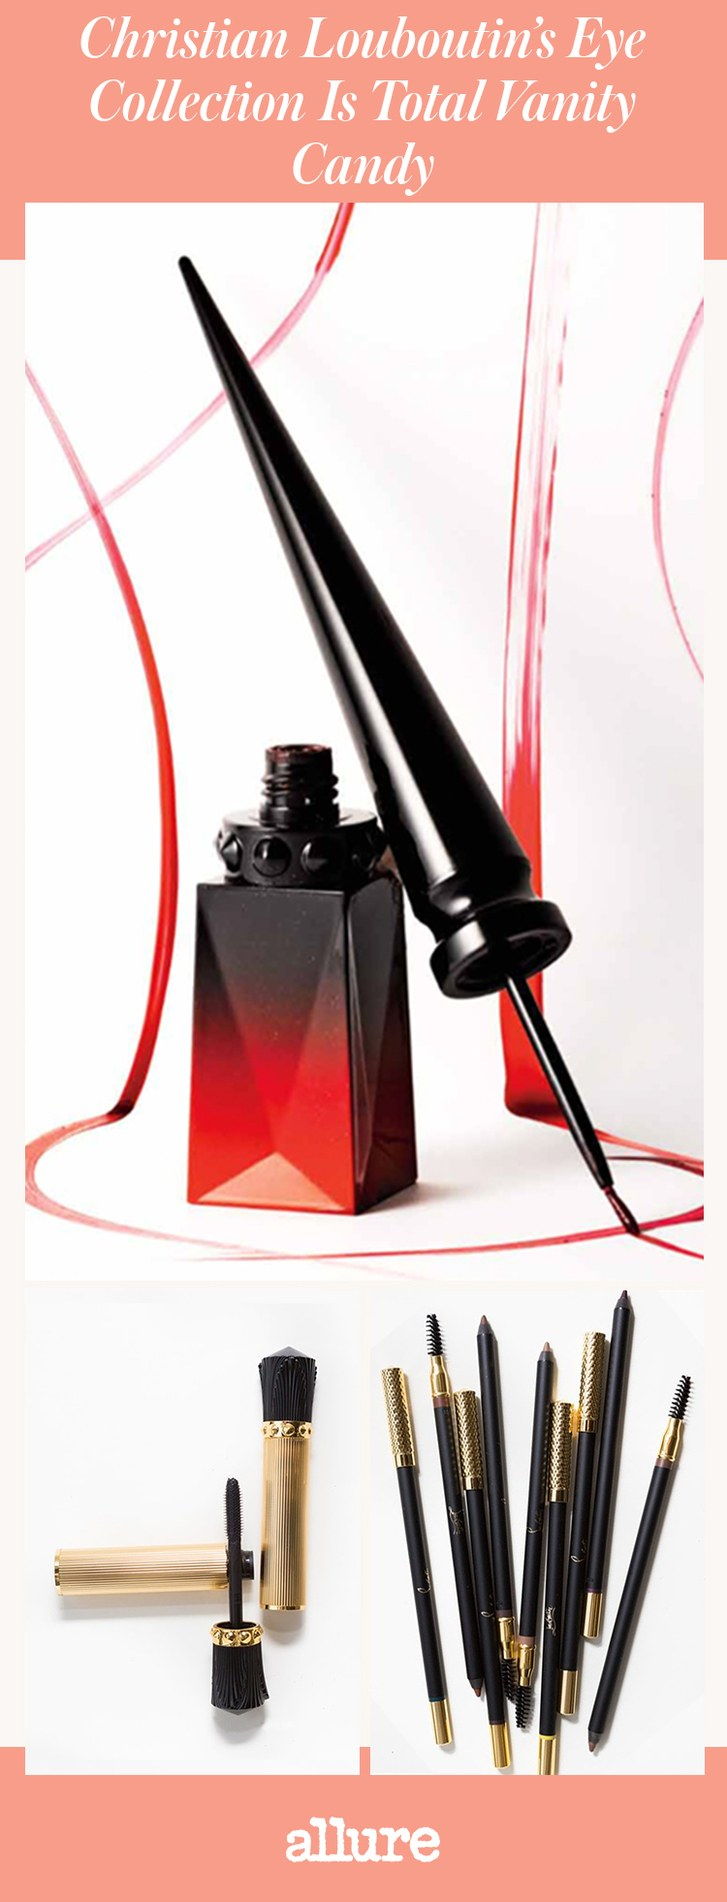  New Christian Louboutin Eye Collection Is Total Vanity Candy